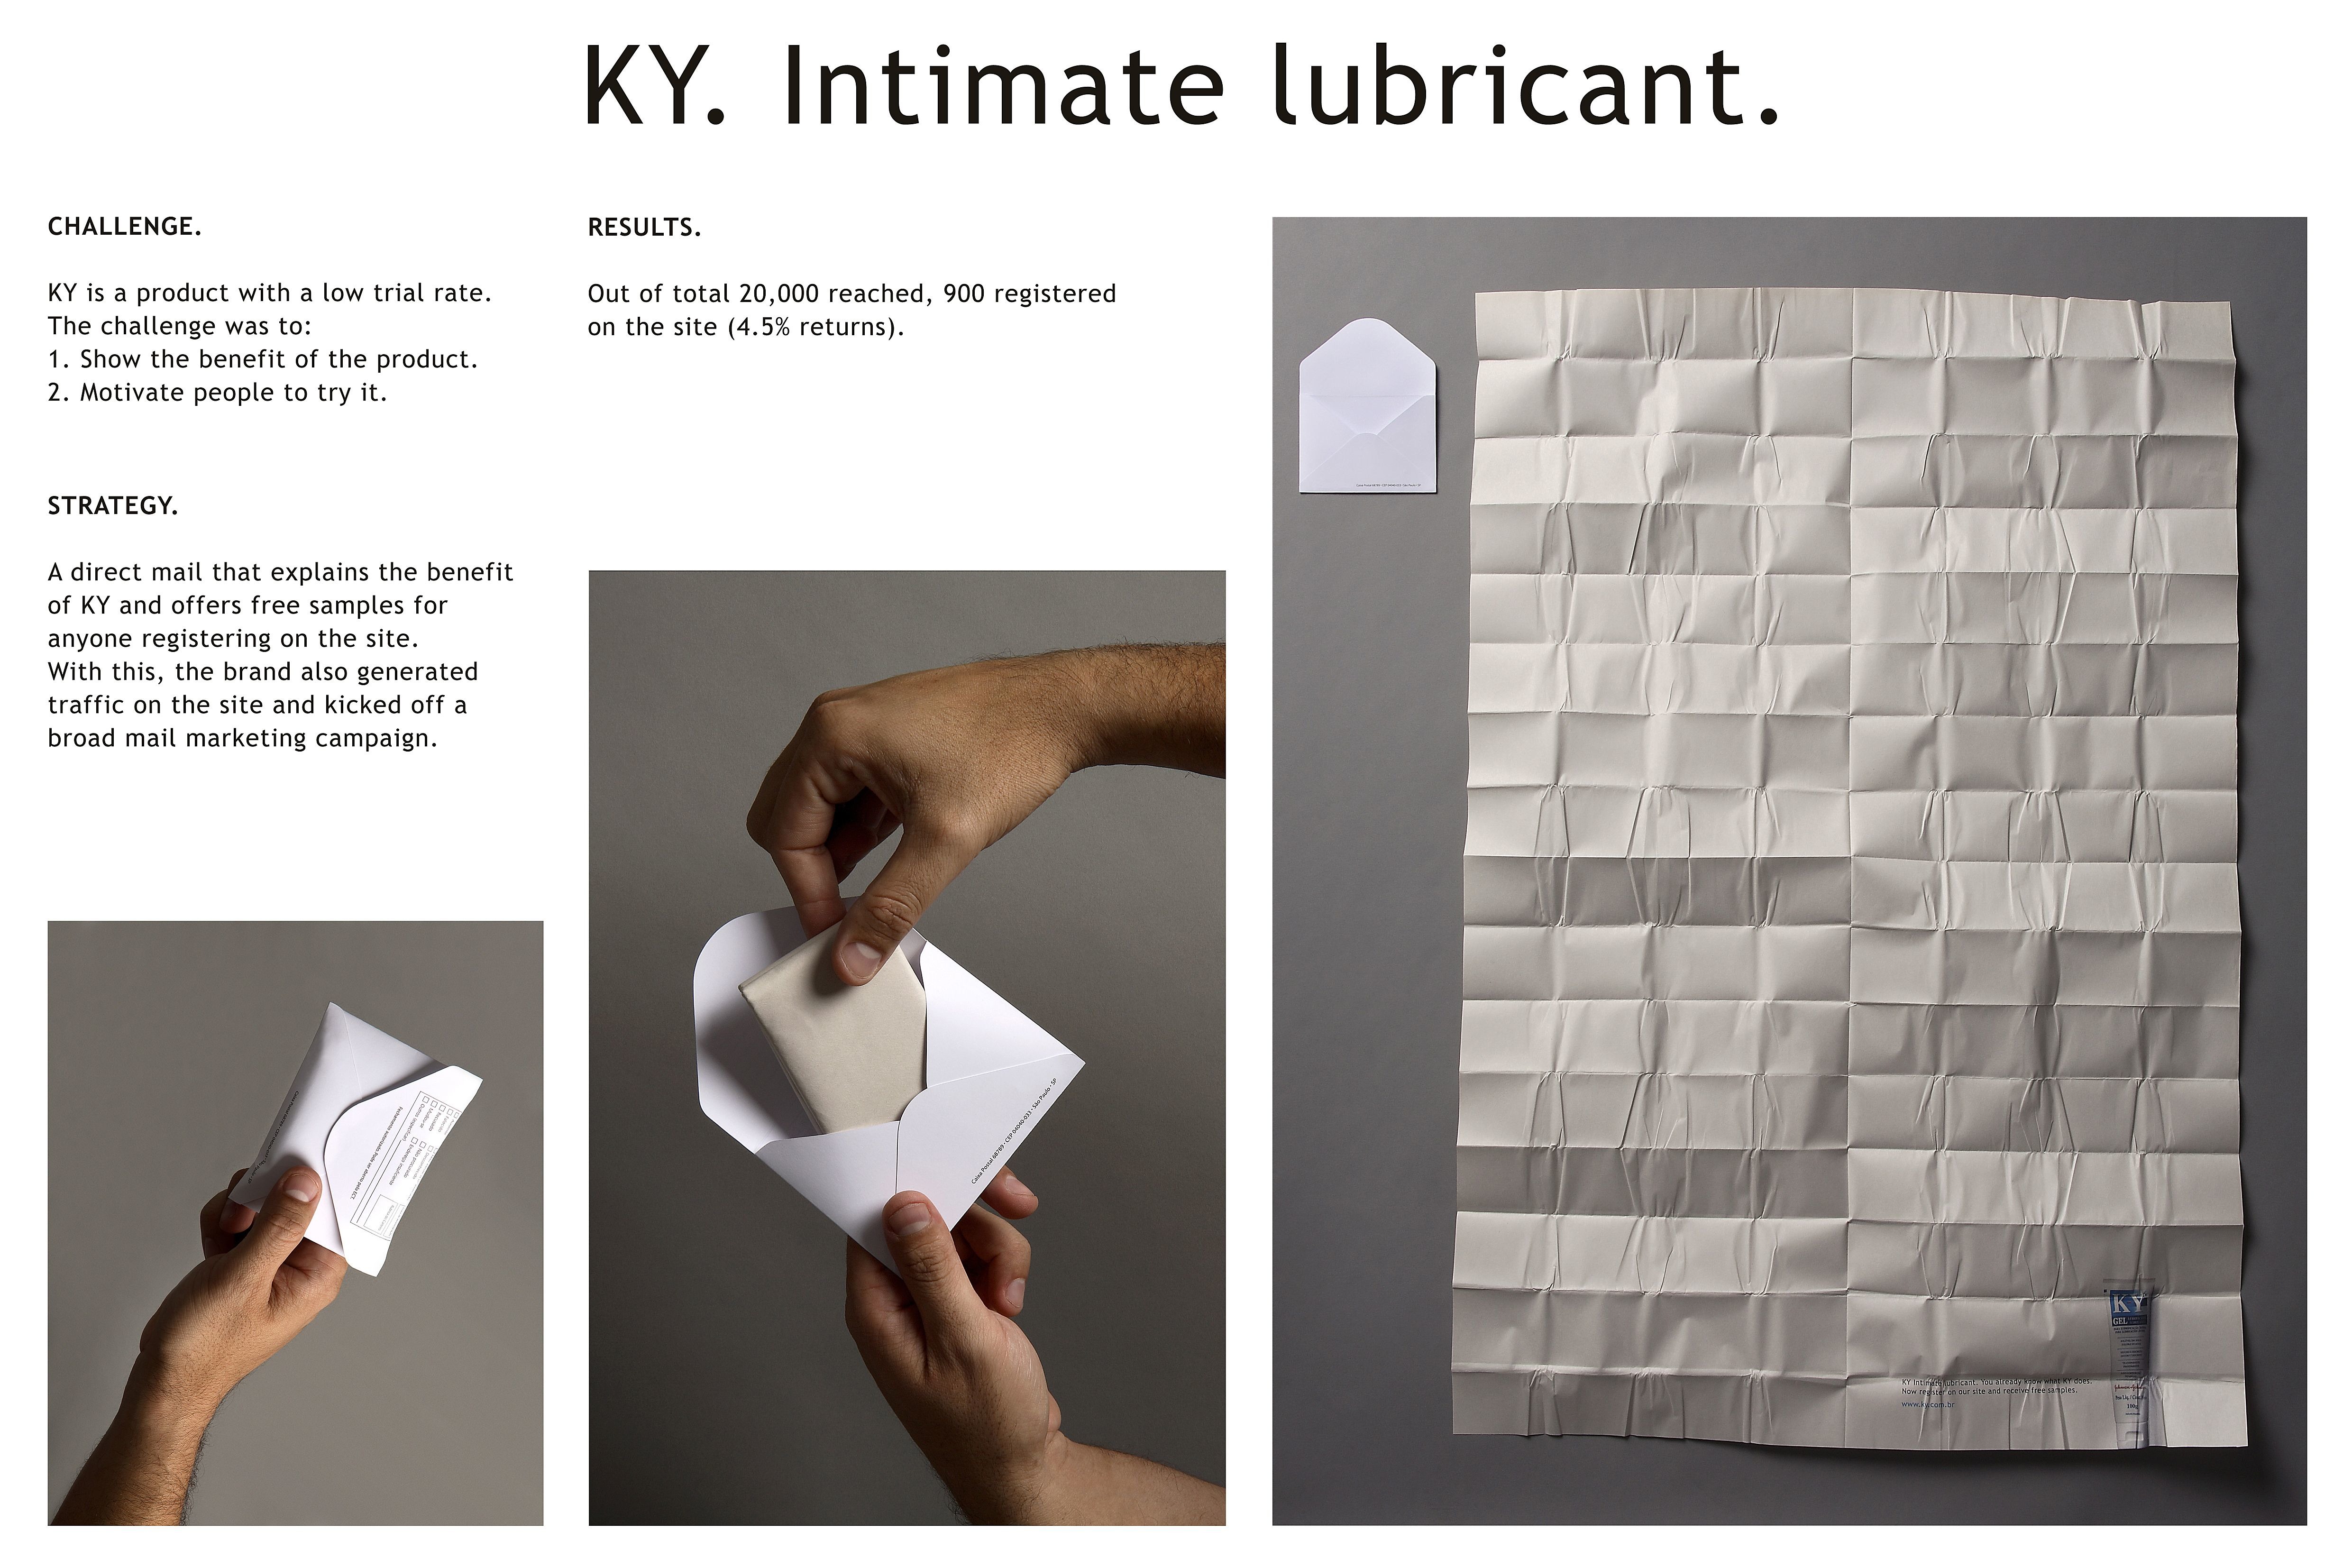 KY LUBRICANT